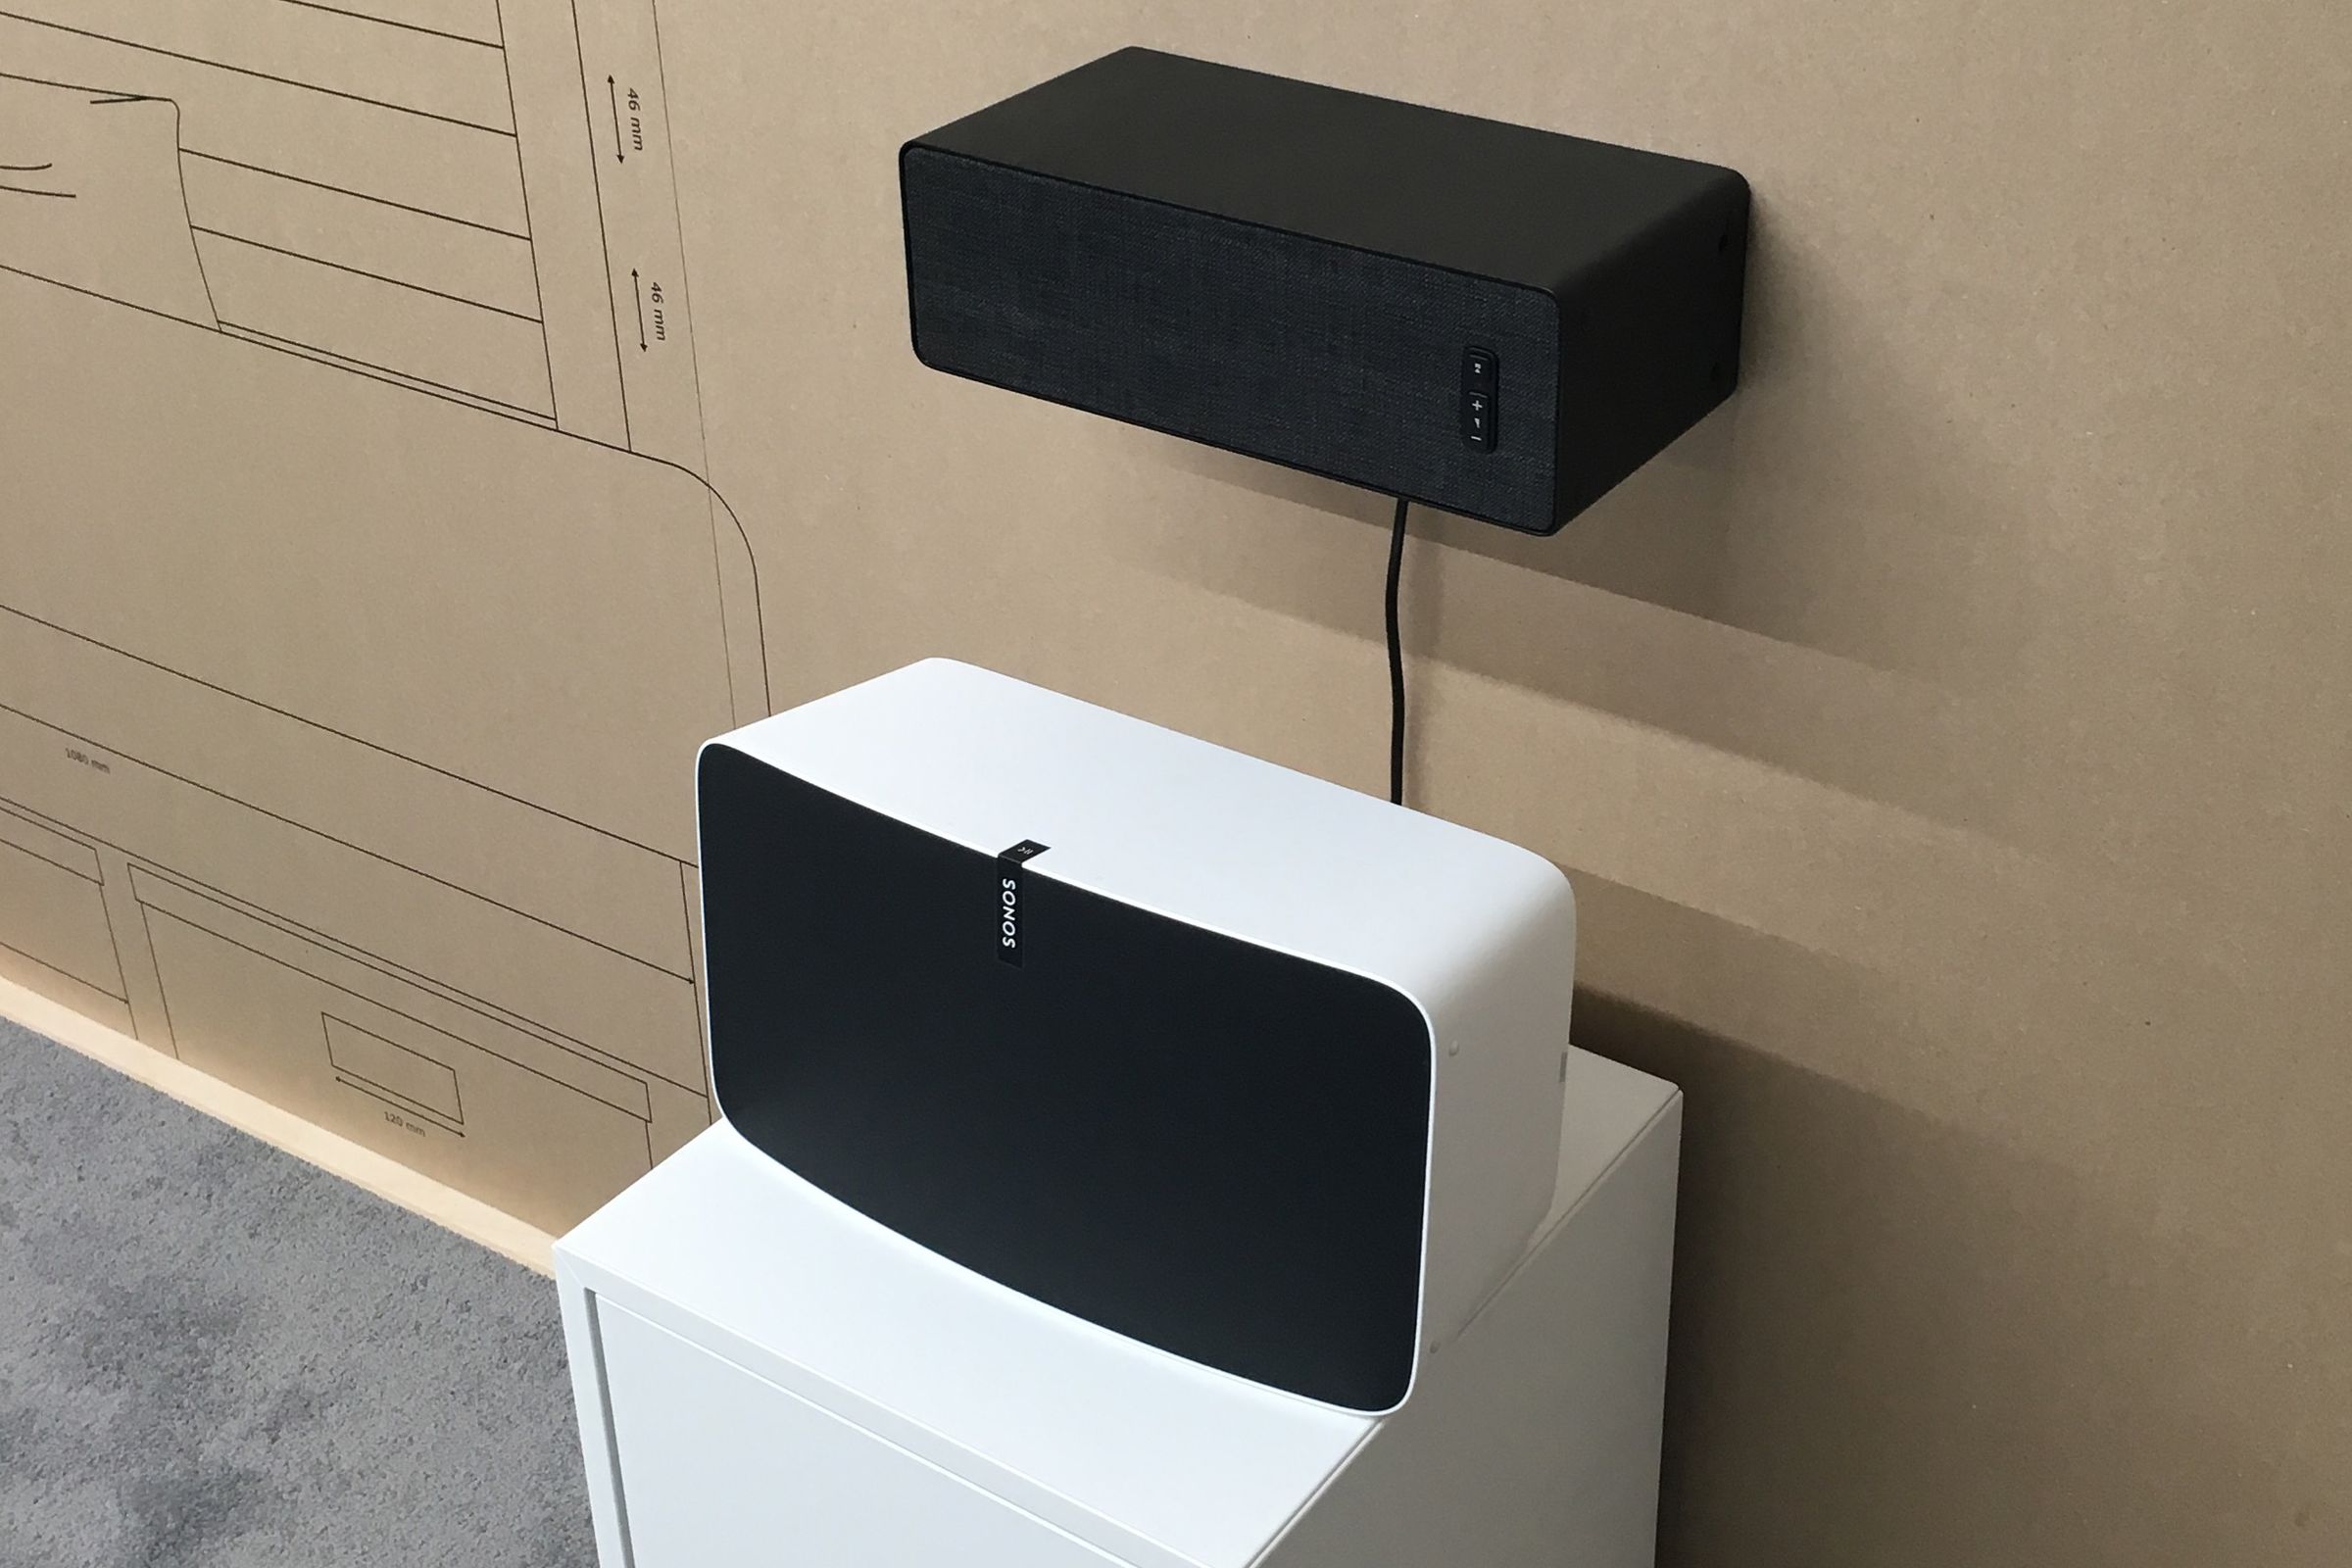 Prototype Ikea speaker attached to wall above Sonos  Play:5.